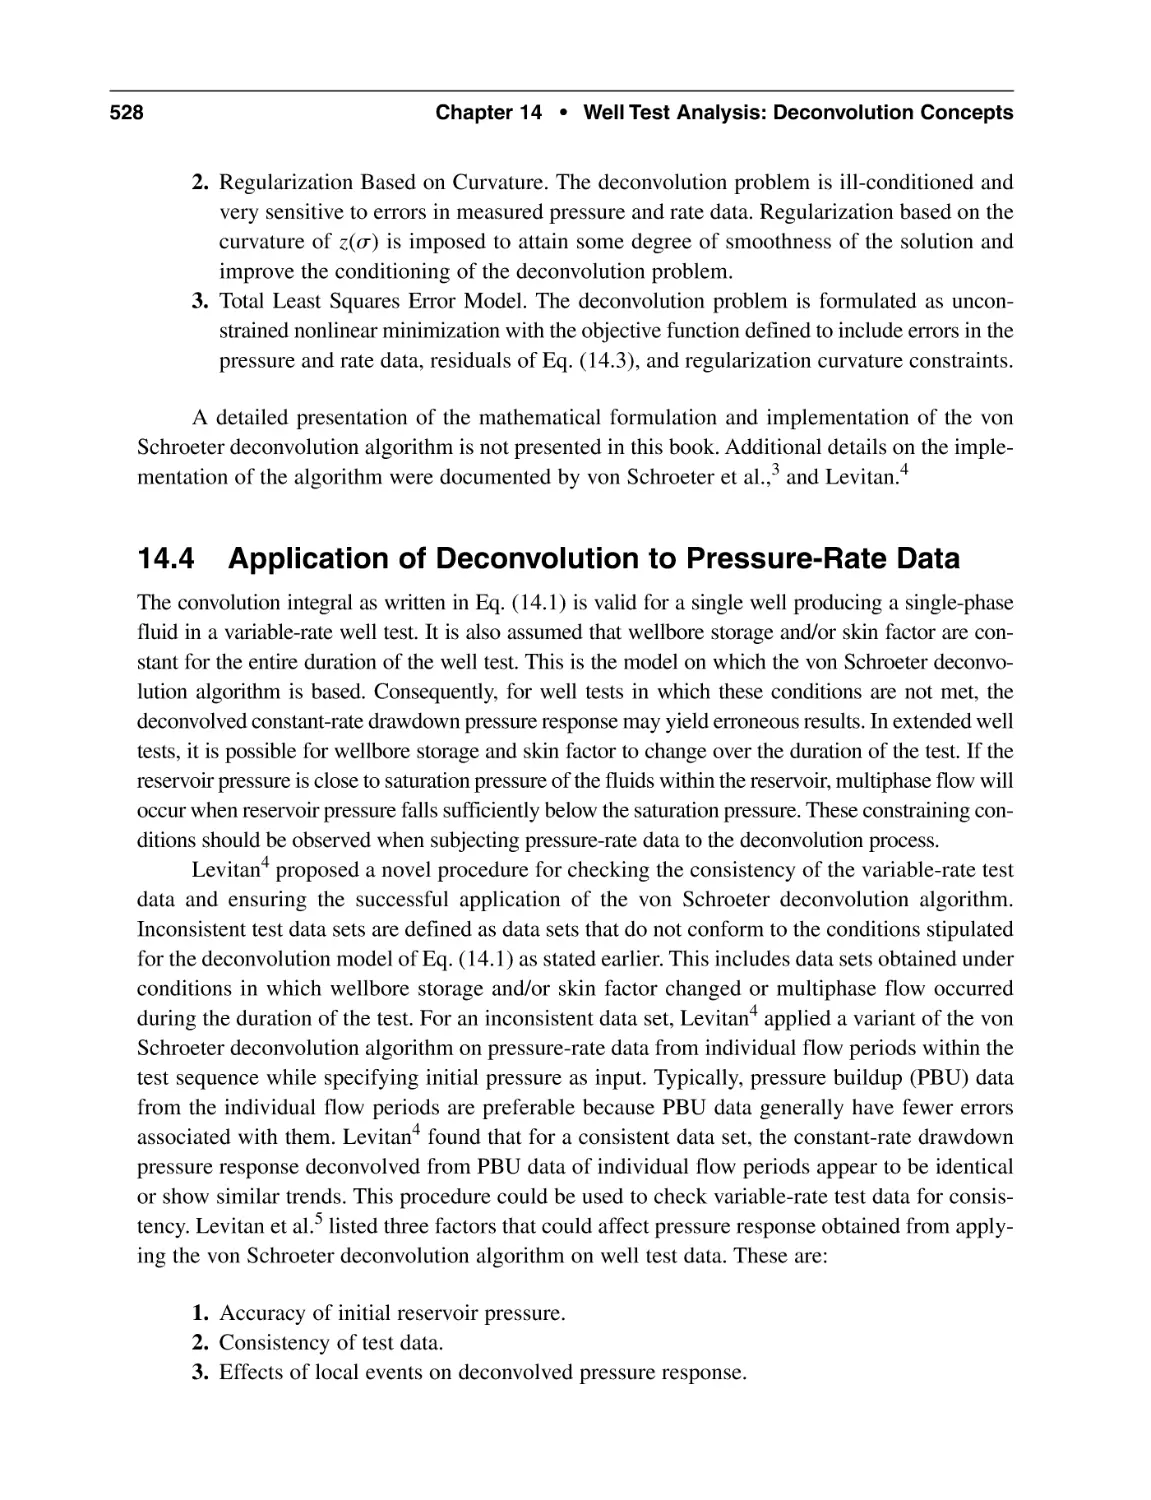 14.4 Application of Deconvolution to Pressure-Rate Data